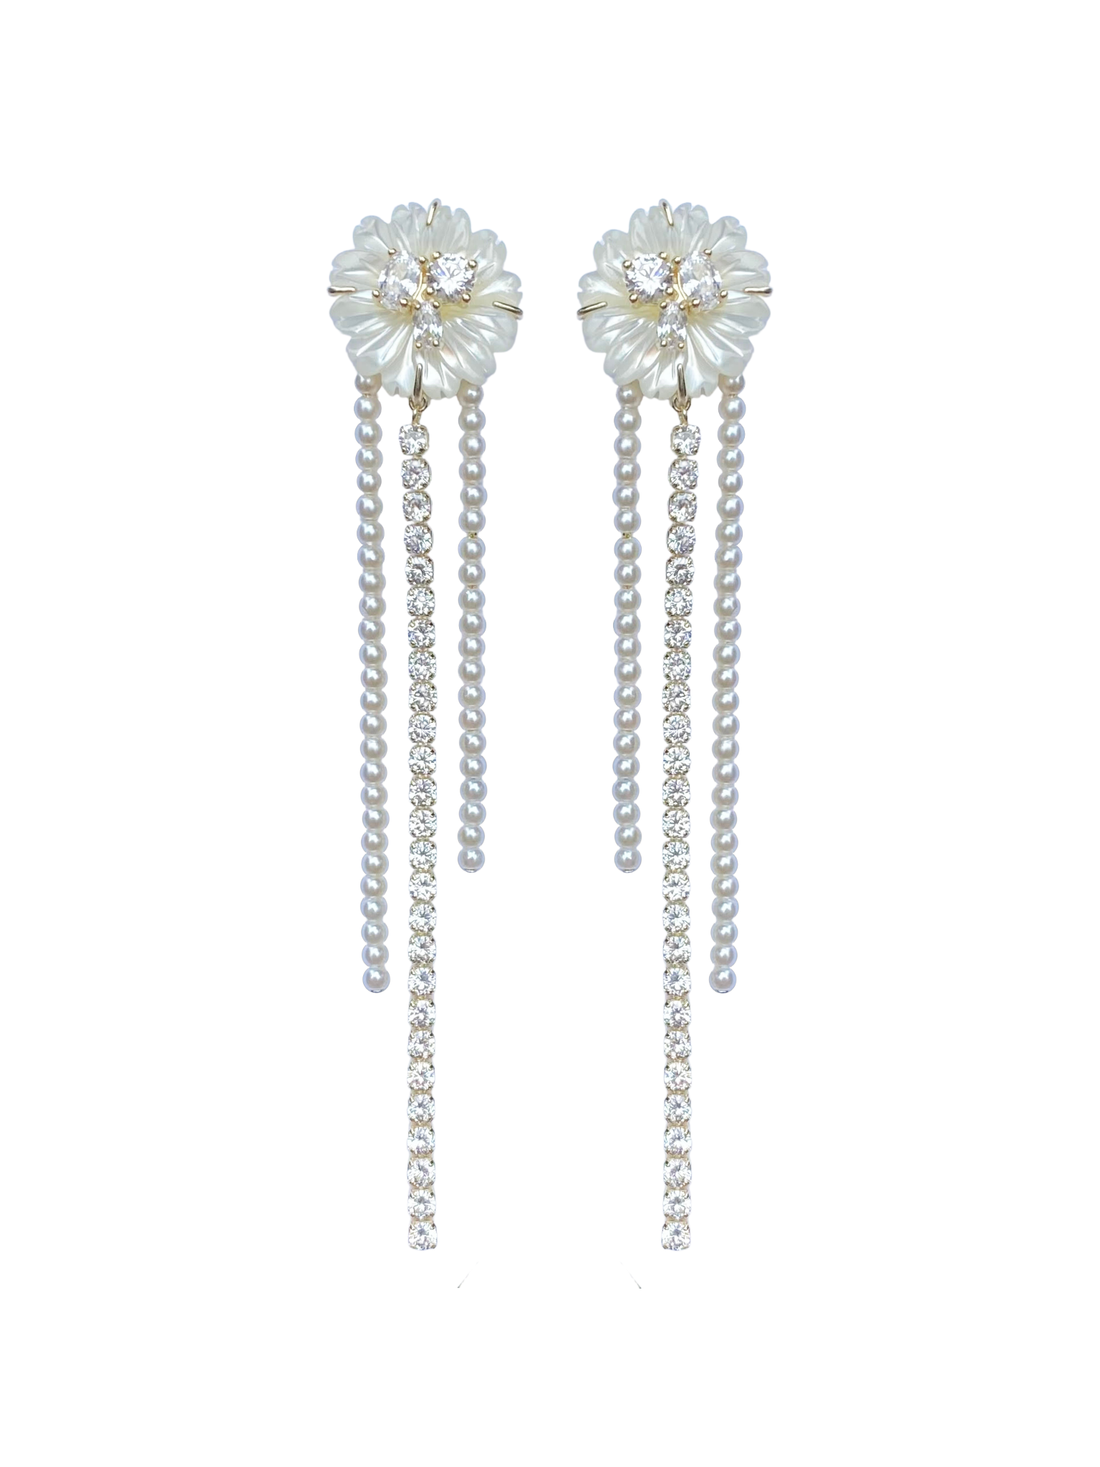 Mother of Pearl + Pearly & Embellished Tassels